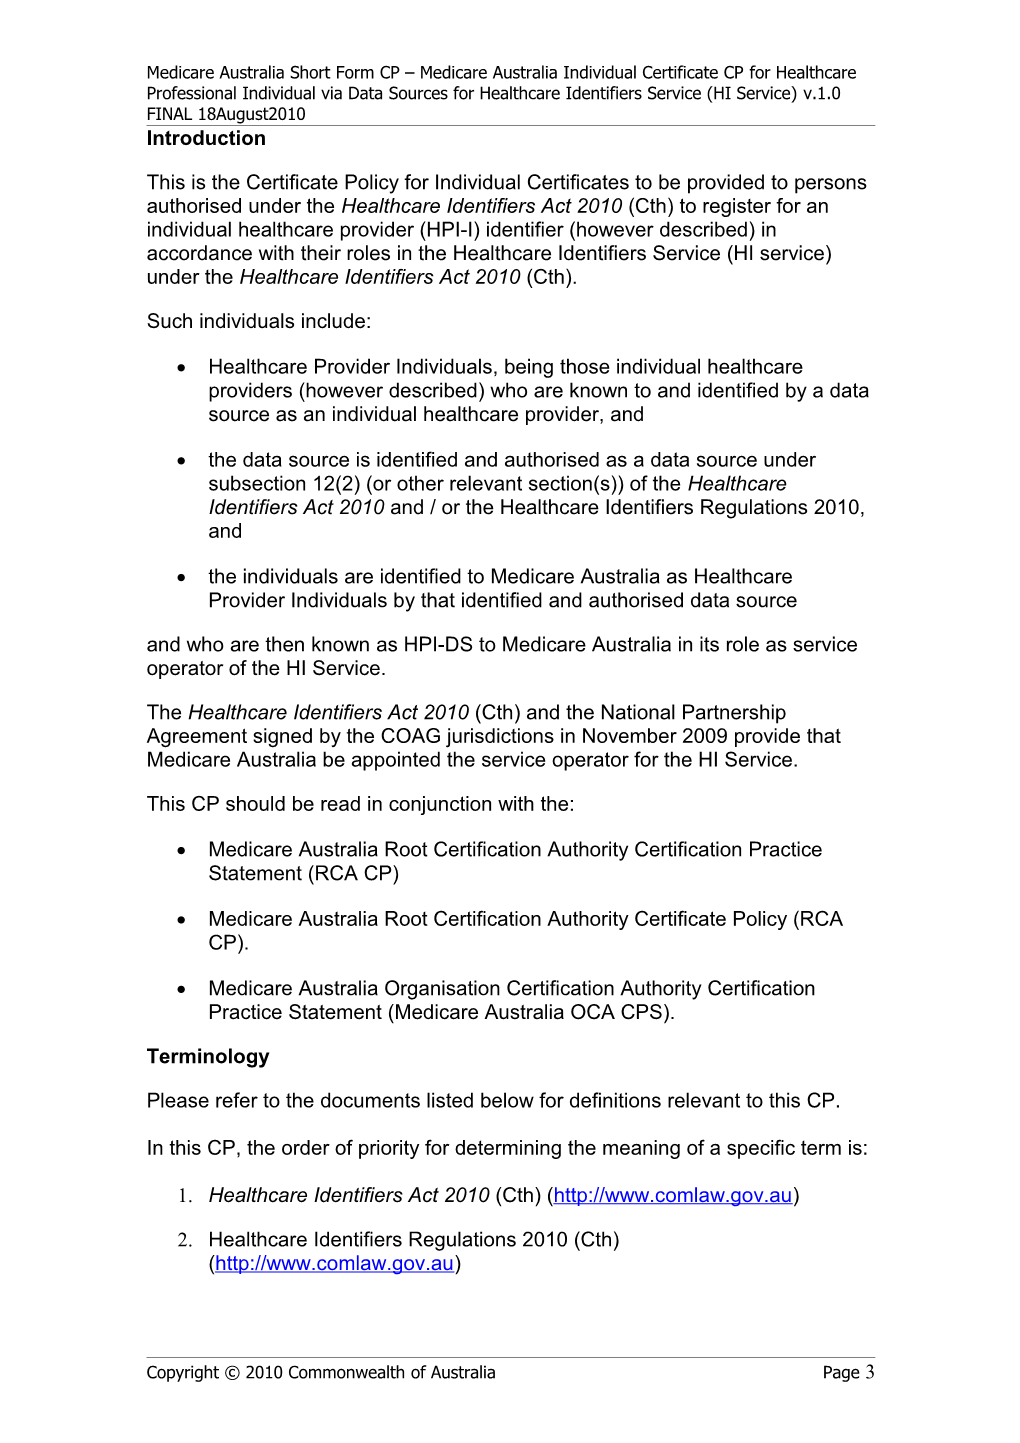 Medicare Australia Community of Interest Certificate Policy for Individual Certificates